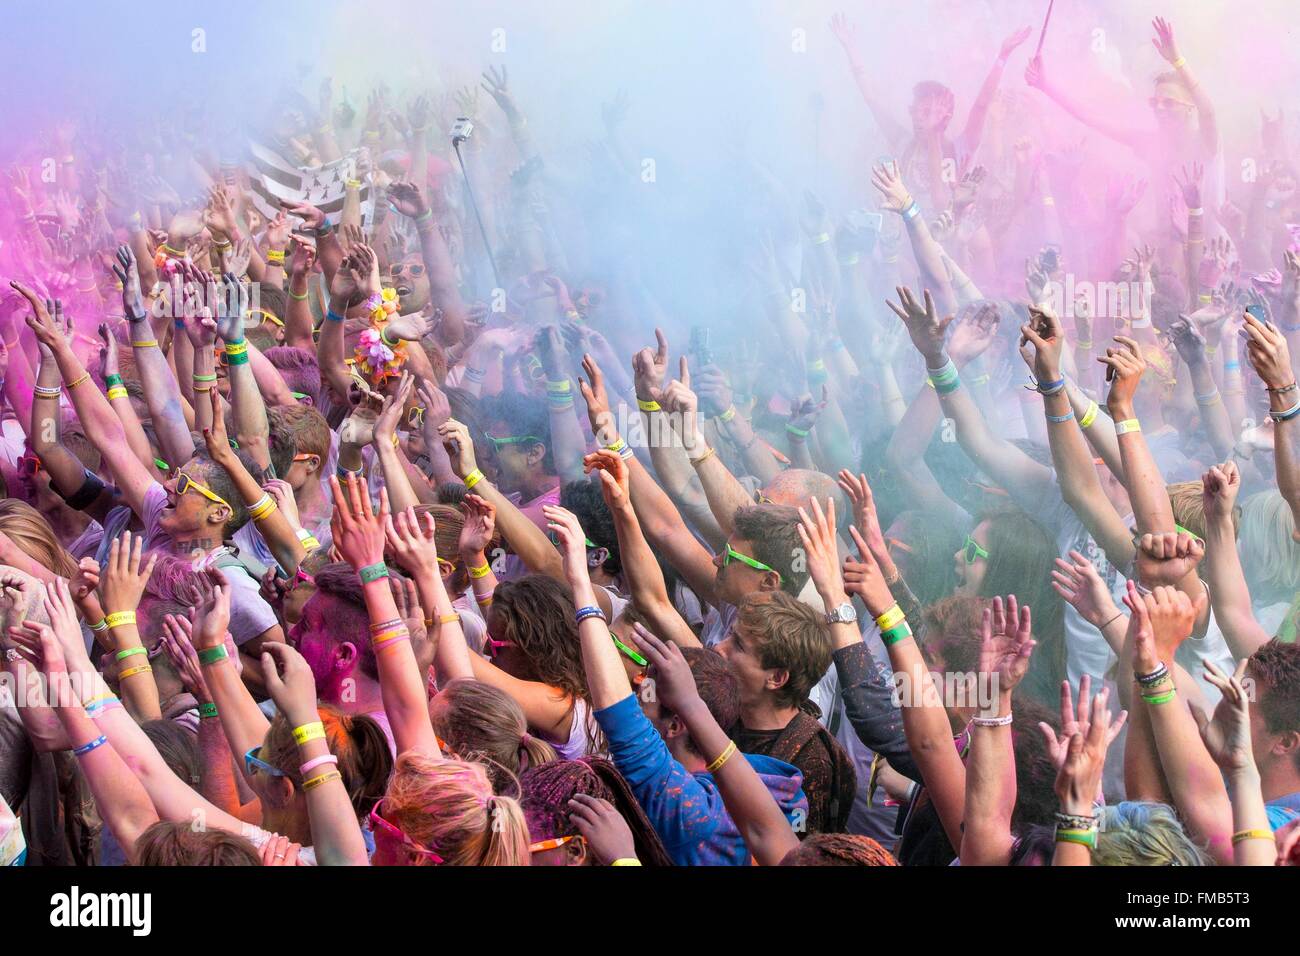 France, Morbihan, Lorient, atmosphere during Color me rad , five kilometers running with projection of colors Stock Photo